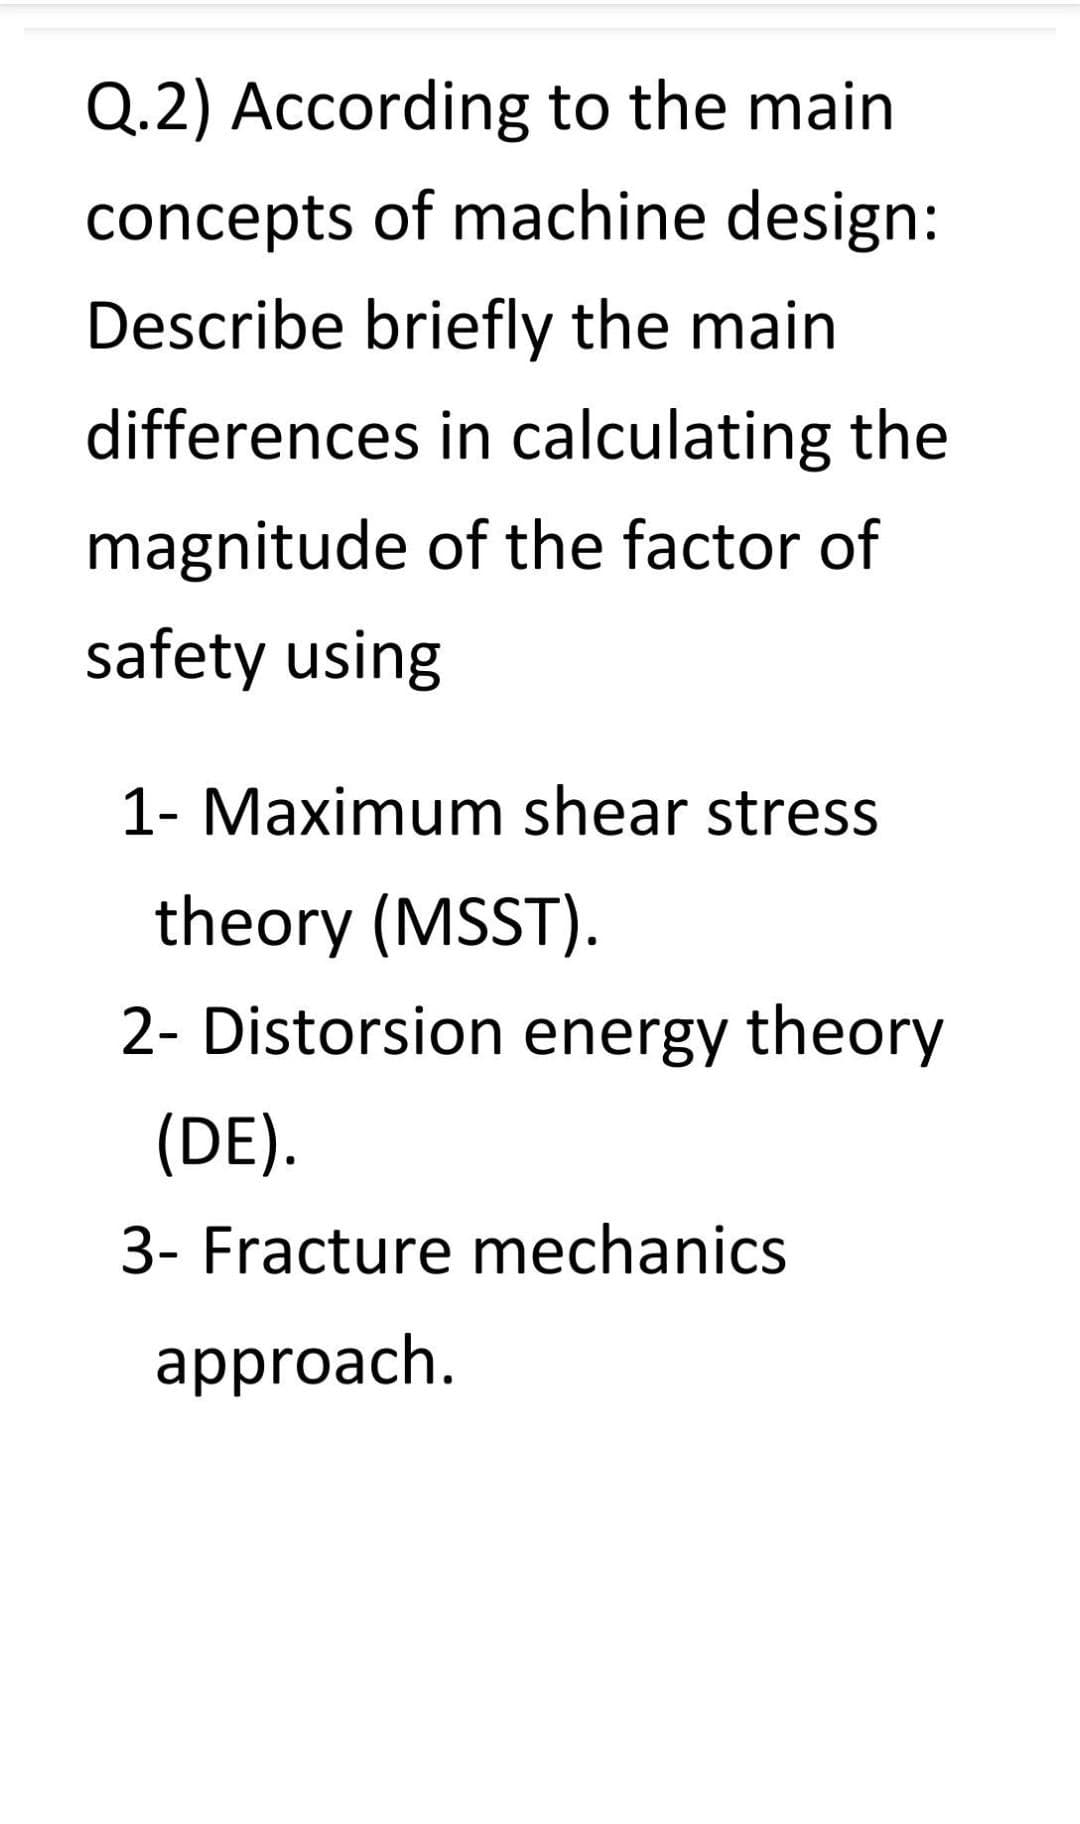 Q.2) According to the main
concepts of machine design:
Describe briefly the main
differences in calculating the
magnitude of the factor of
safety using
1- Maximum shear stress
theory (MSST).
2- Distorsion energy theory
(DE).
3- Fracture mechanics
approach.
